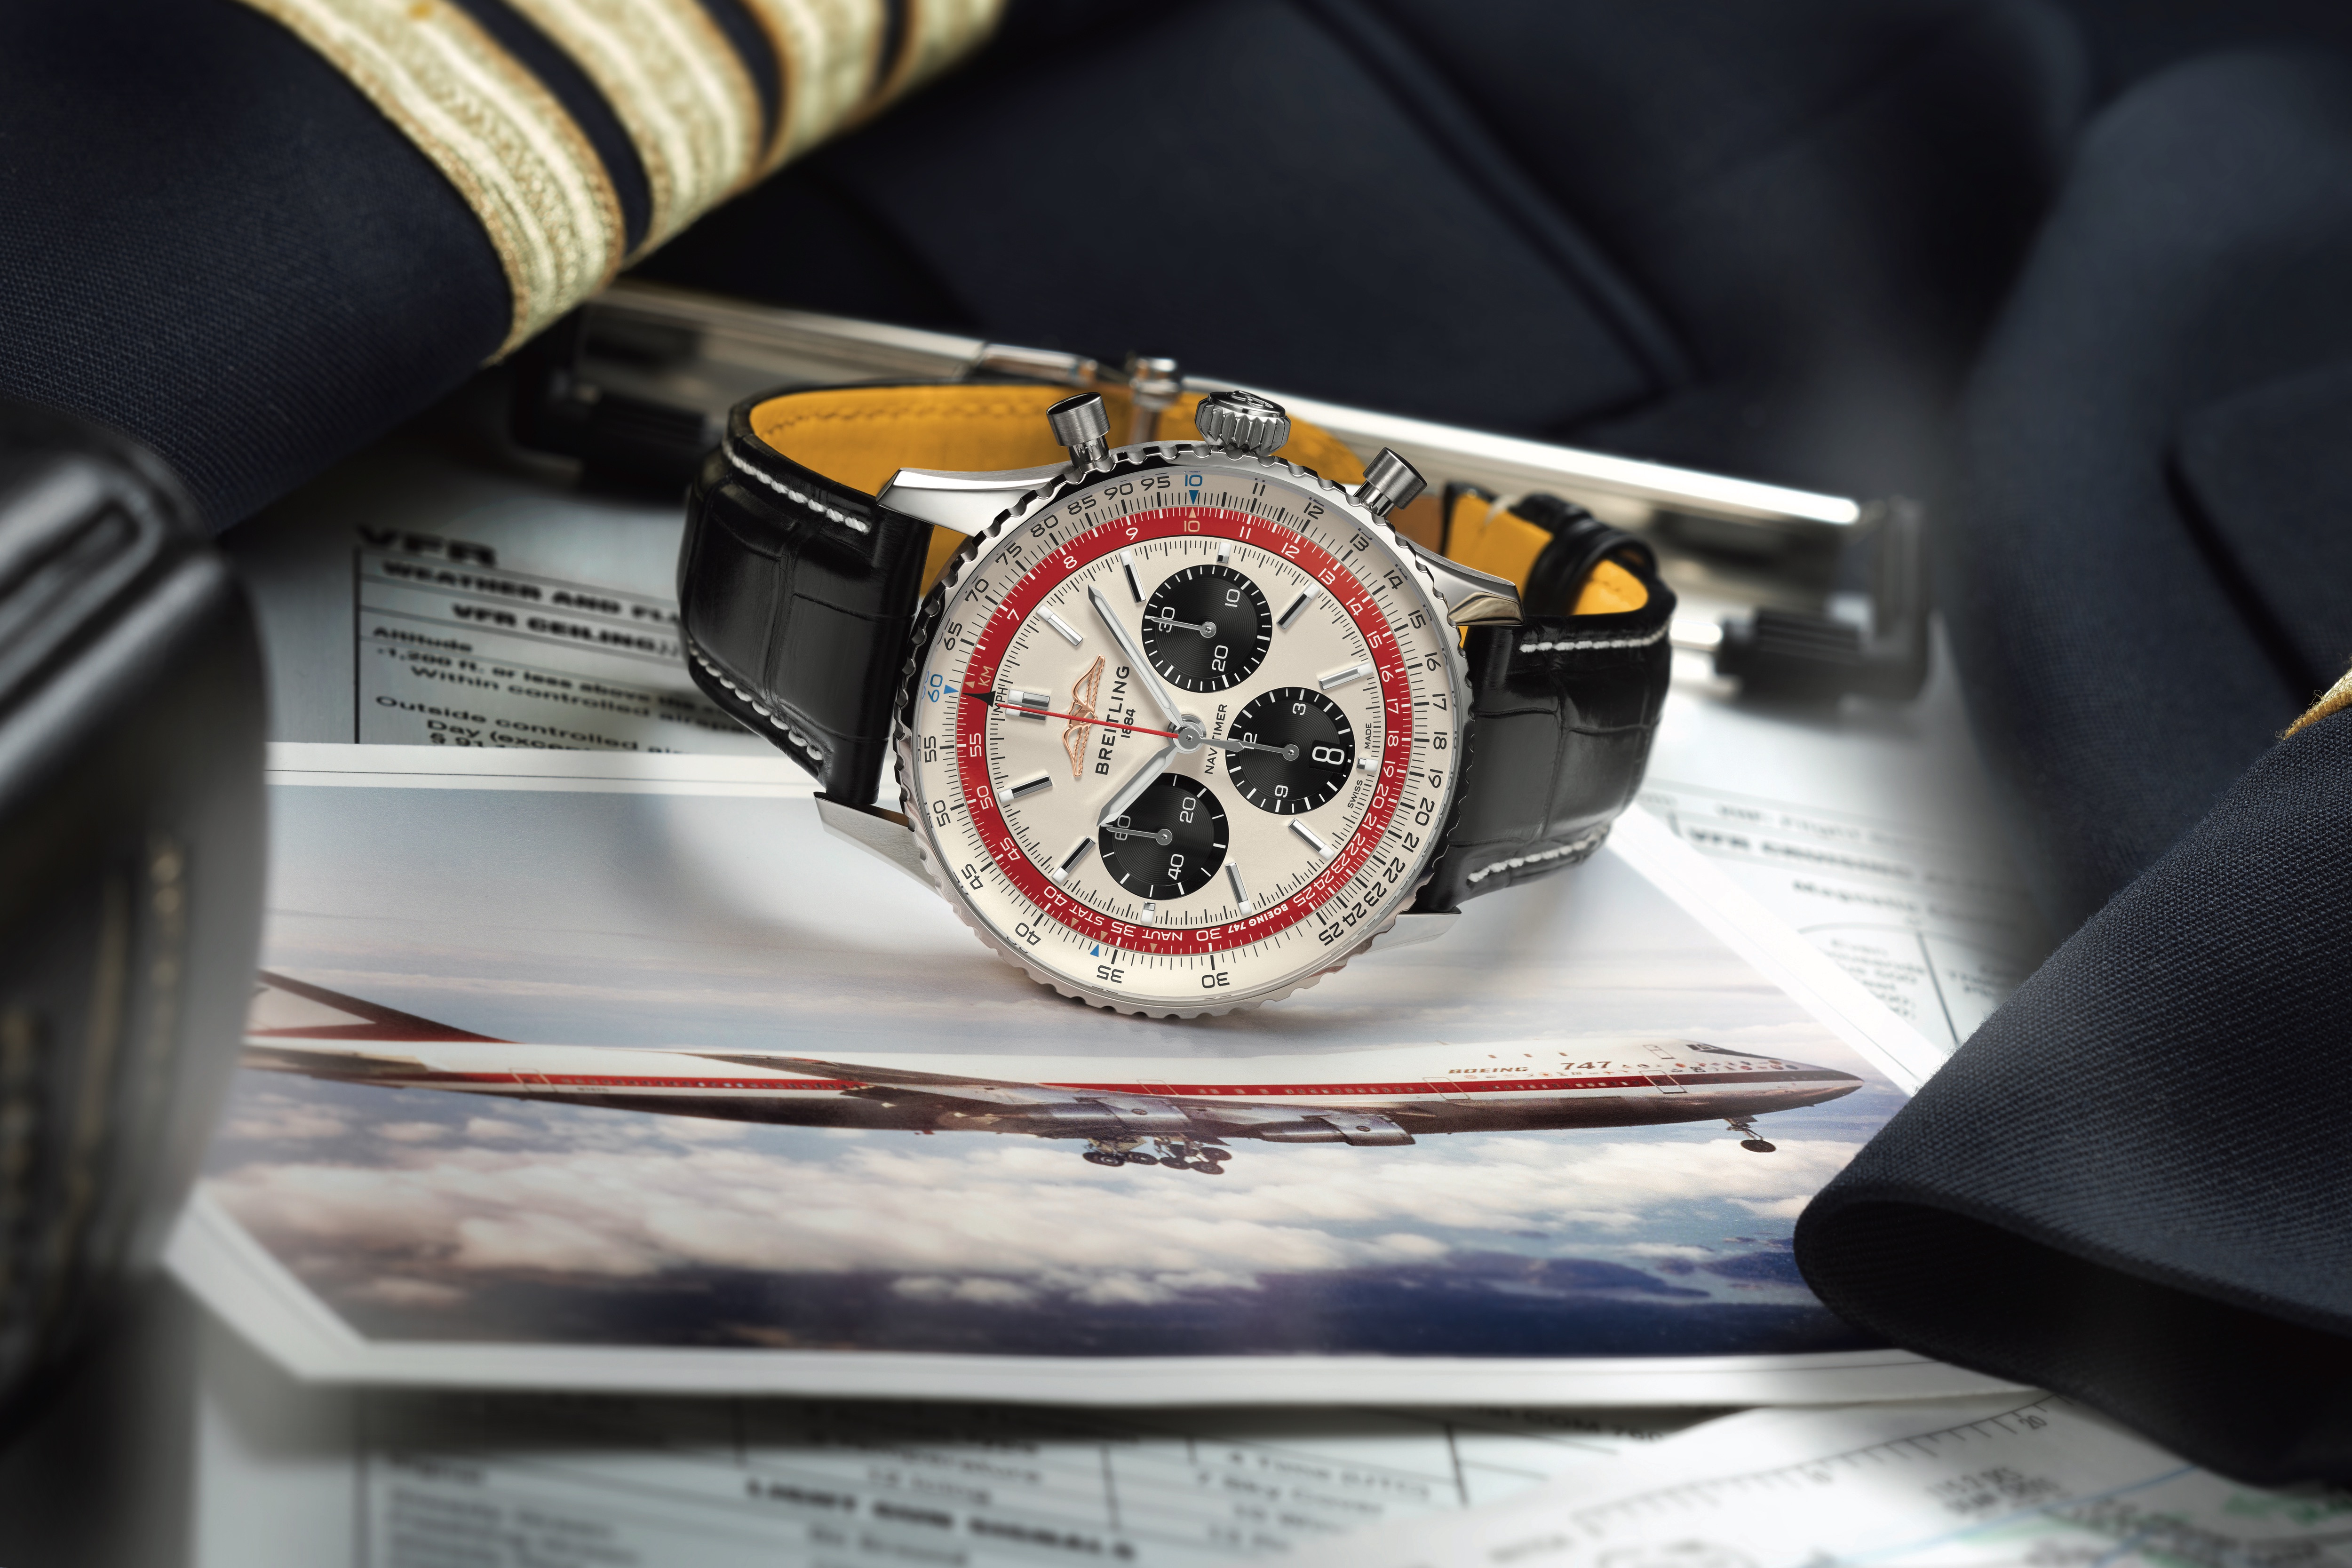 Introduction to the Breitling Navitimer Boeing 747 Limited Edition